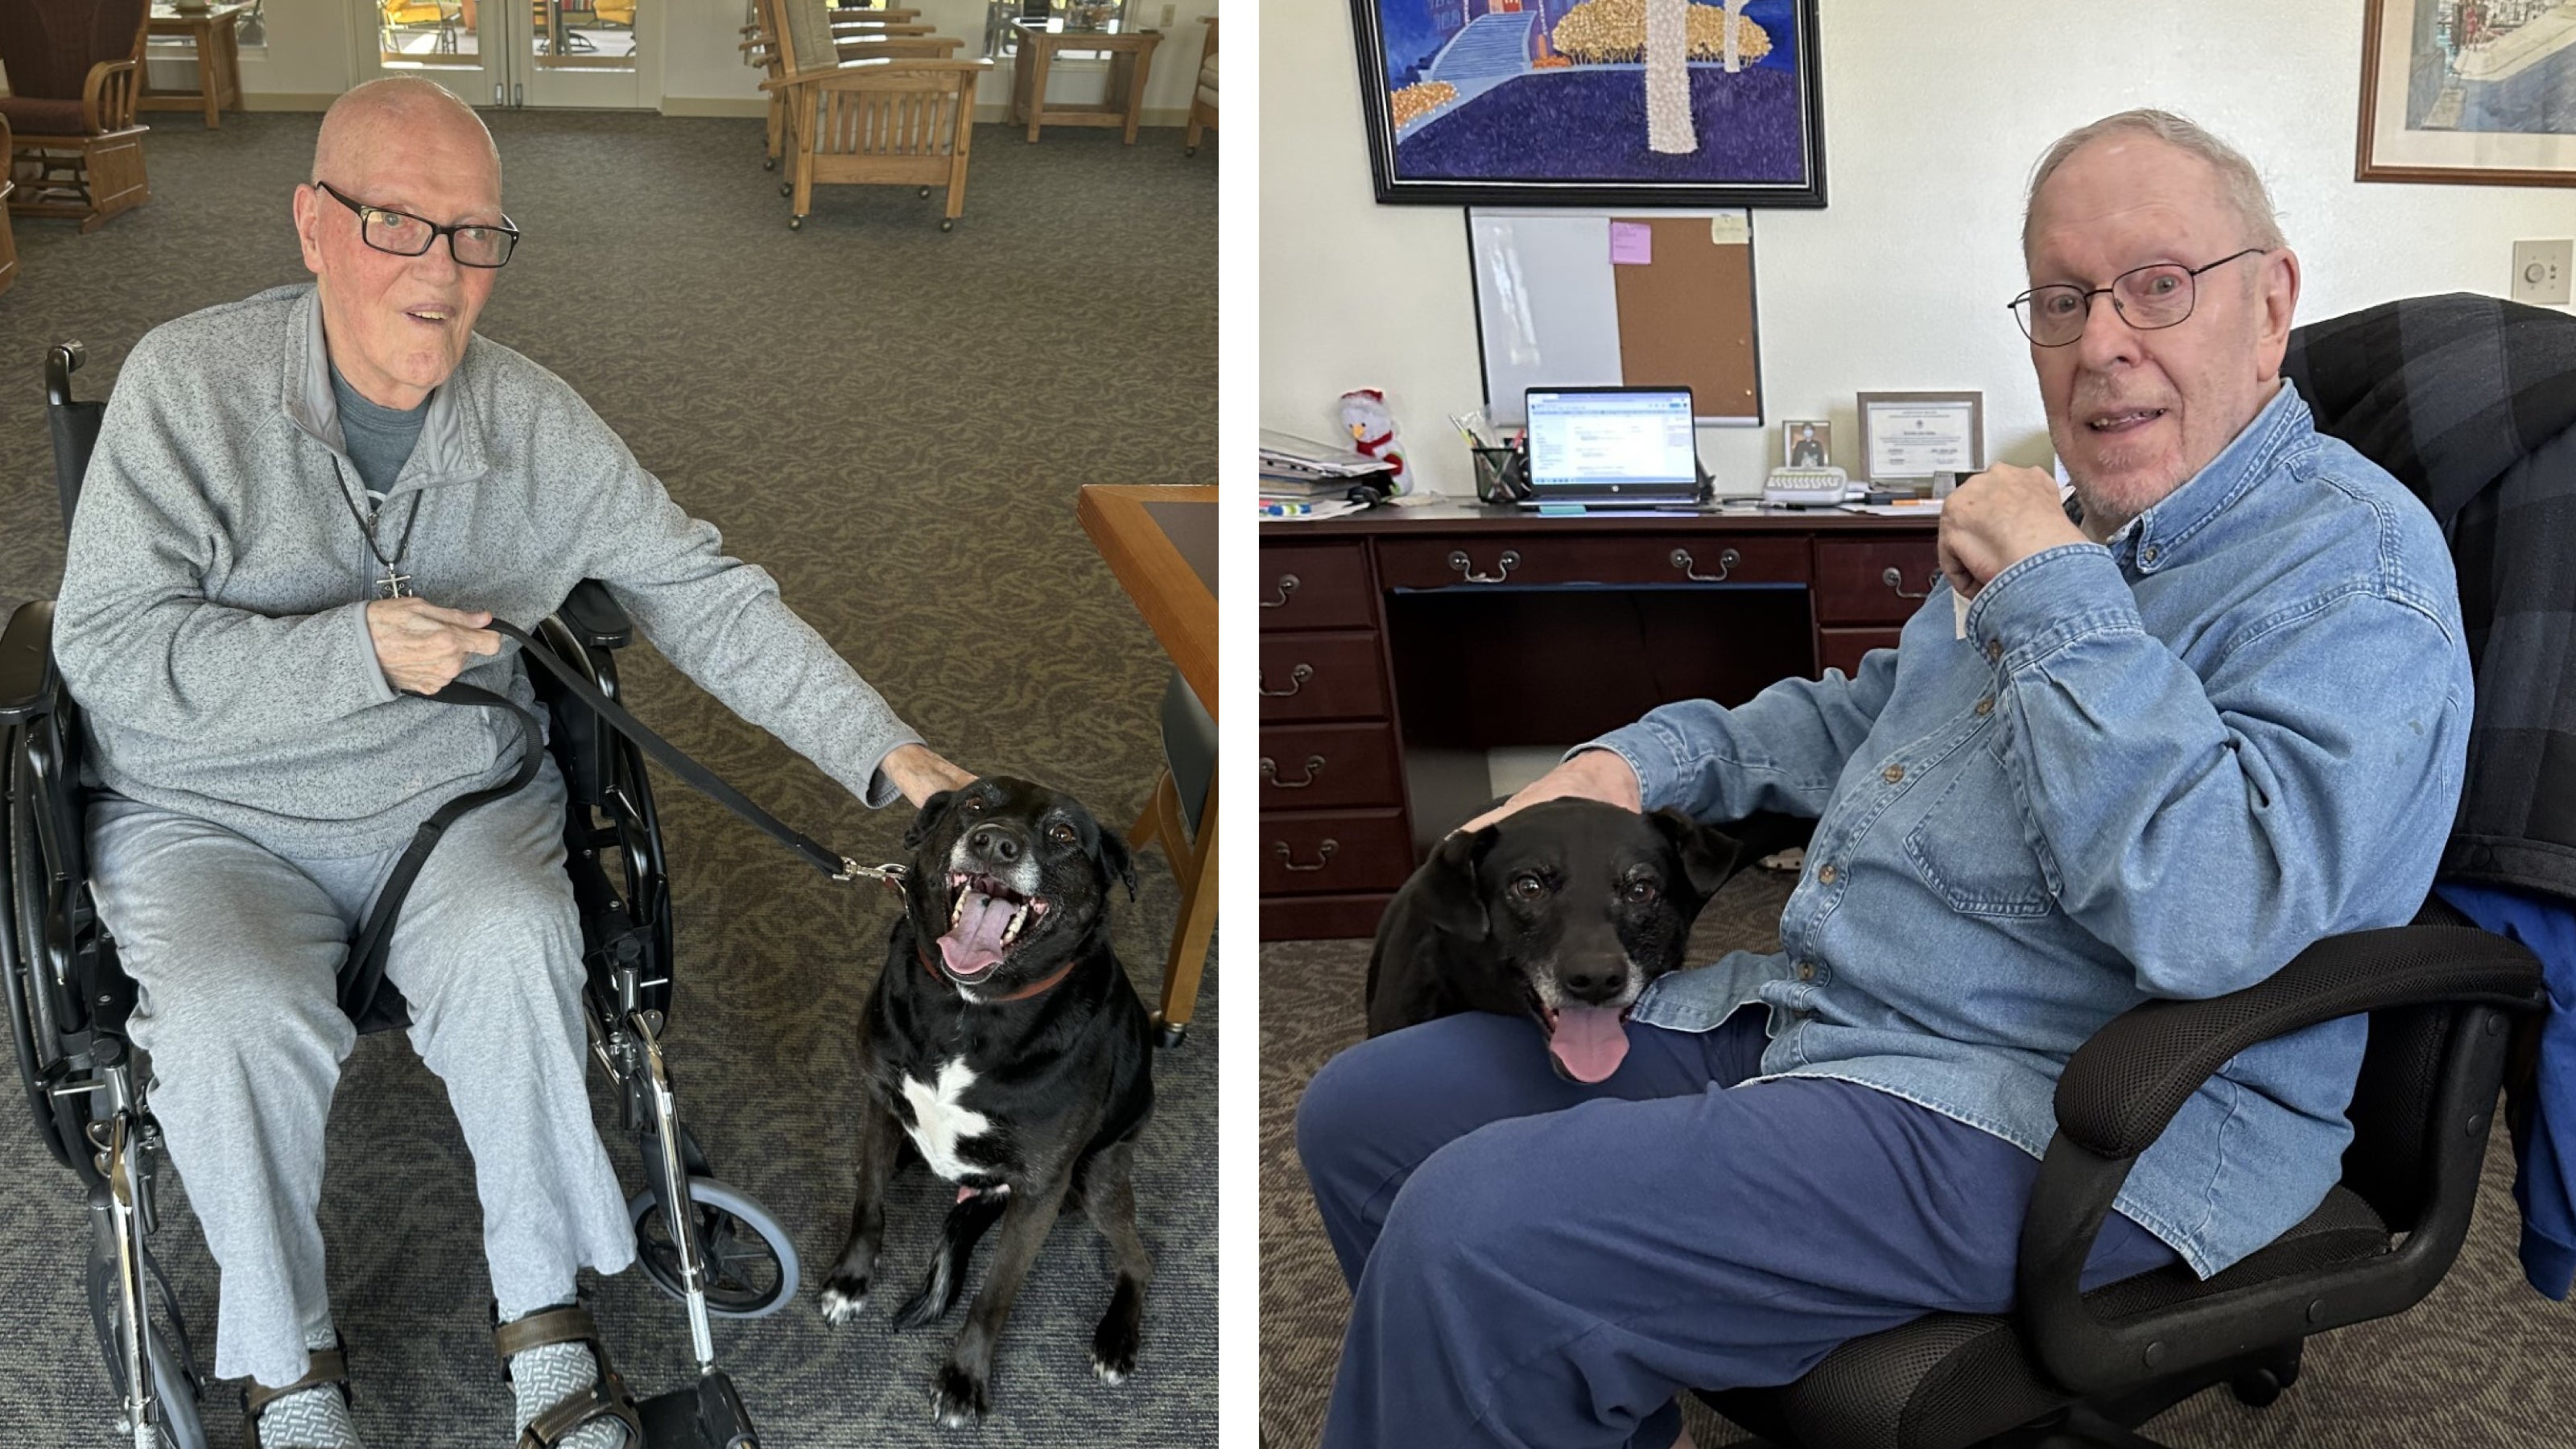 A black and white dog gives and gets love from two patients at a memory care facility